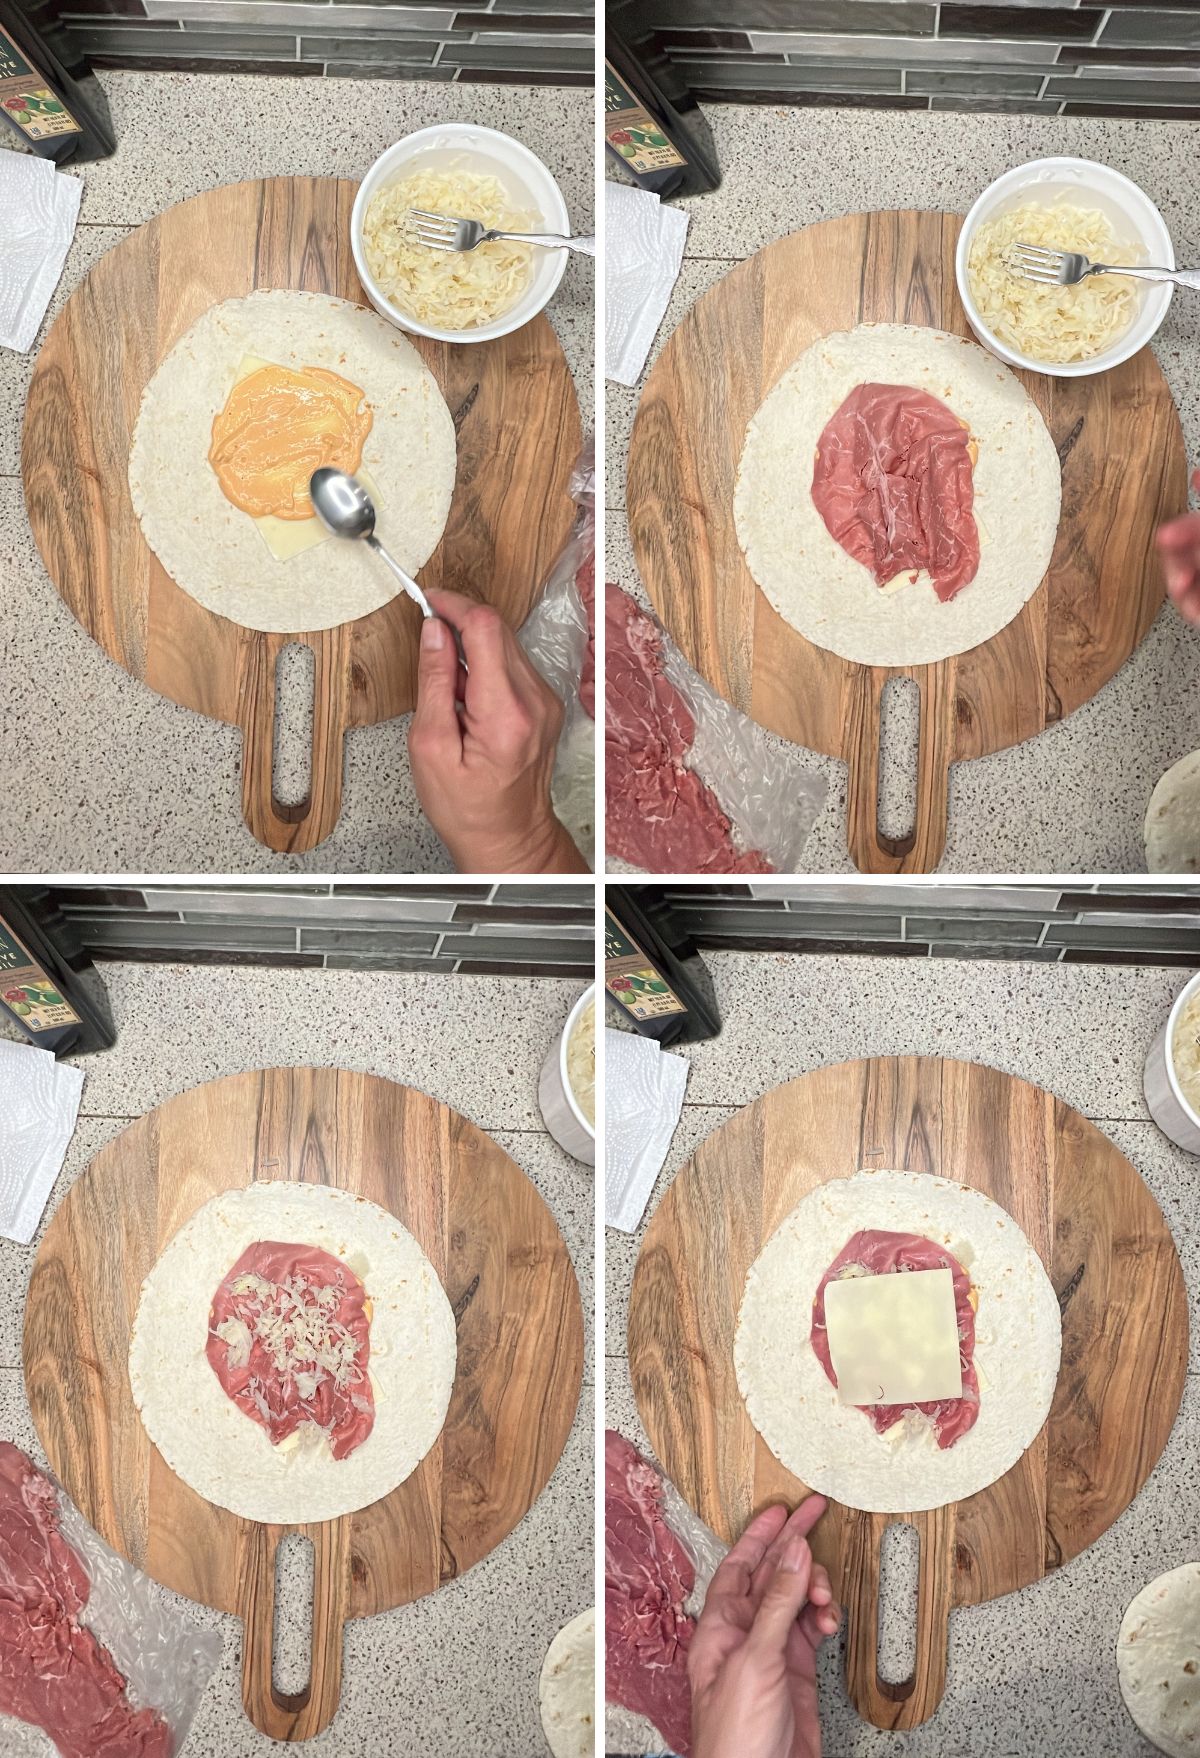 Four-step sequence of making a quesadilla: spreading sauce on a tortilla, adding meat, placing another tortilla on top, and finishing with a cheese slice.